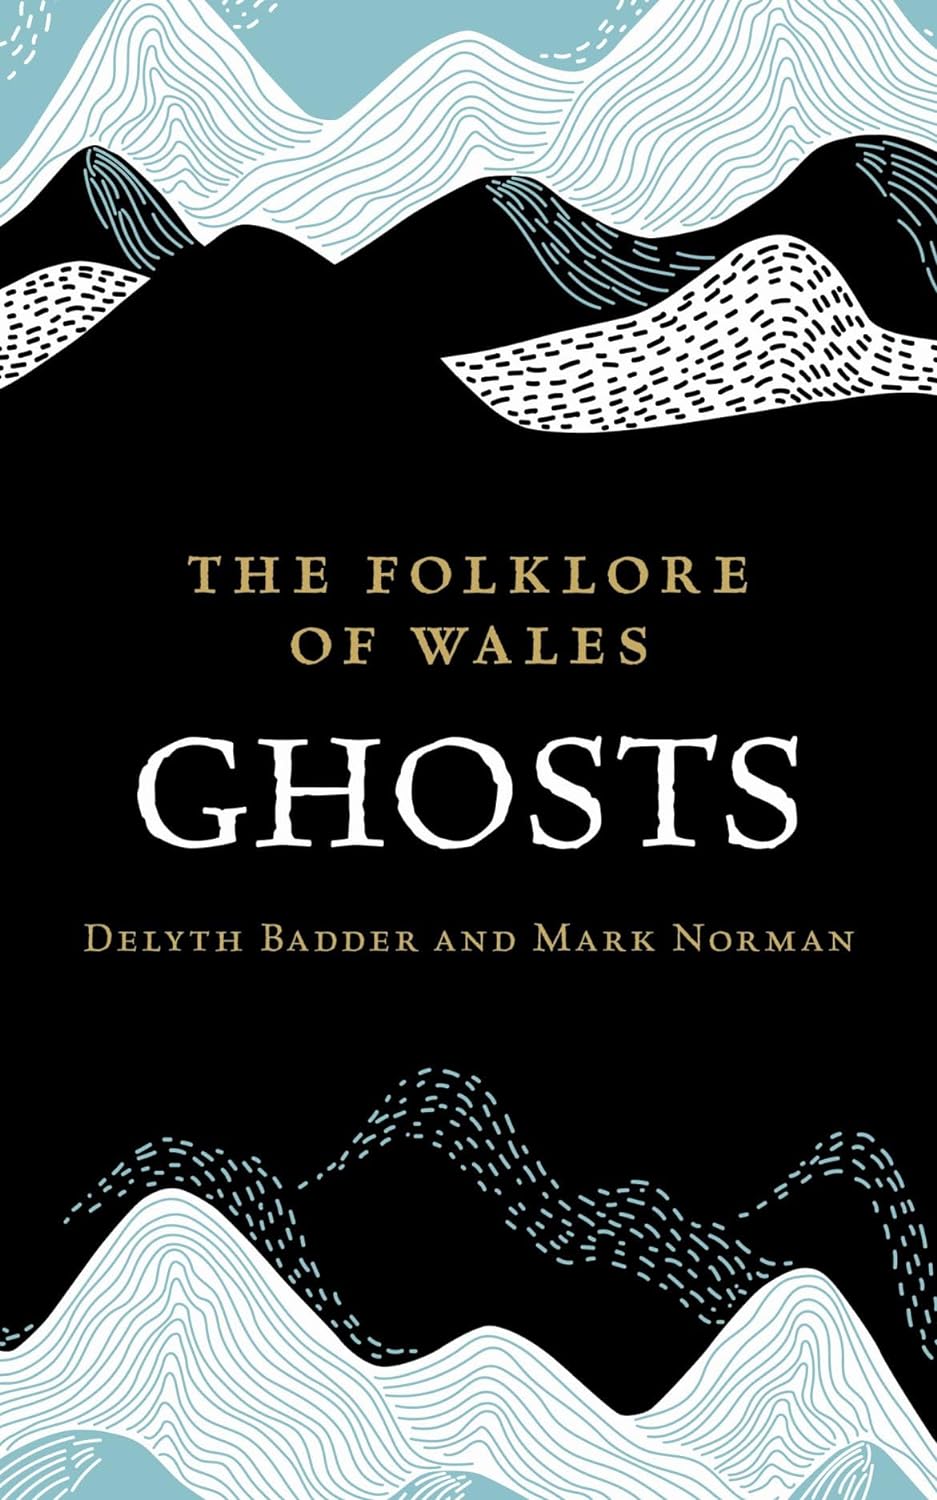 Book - The Folklore of Wales: Ghosts